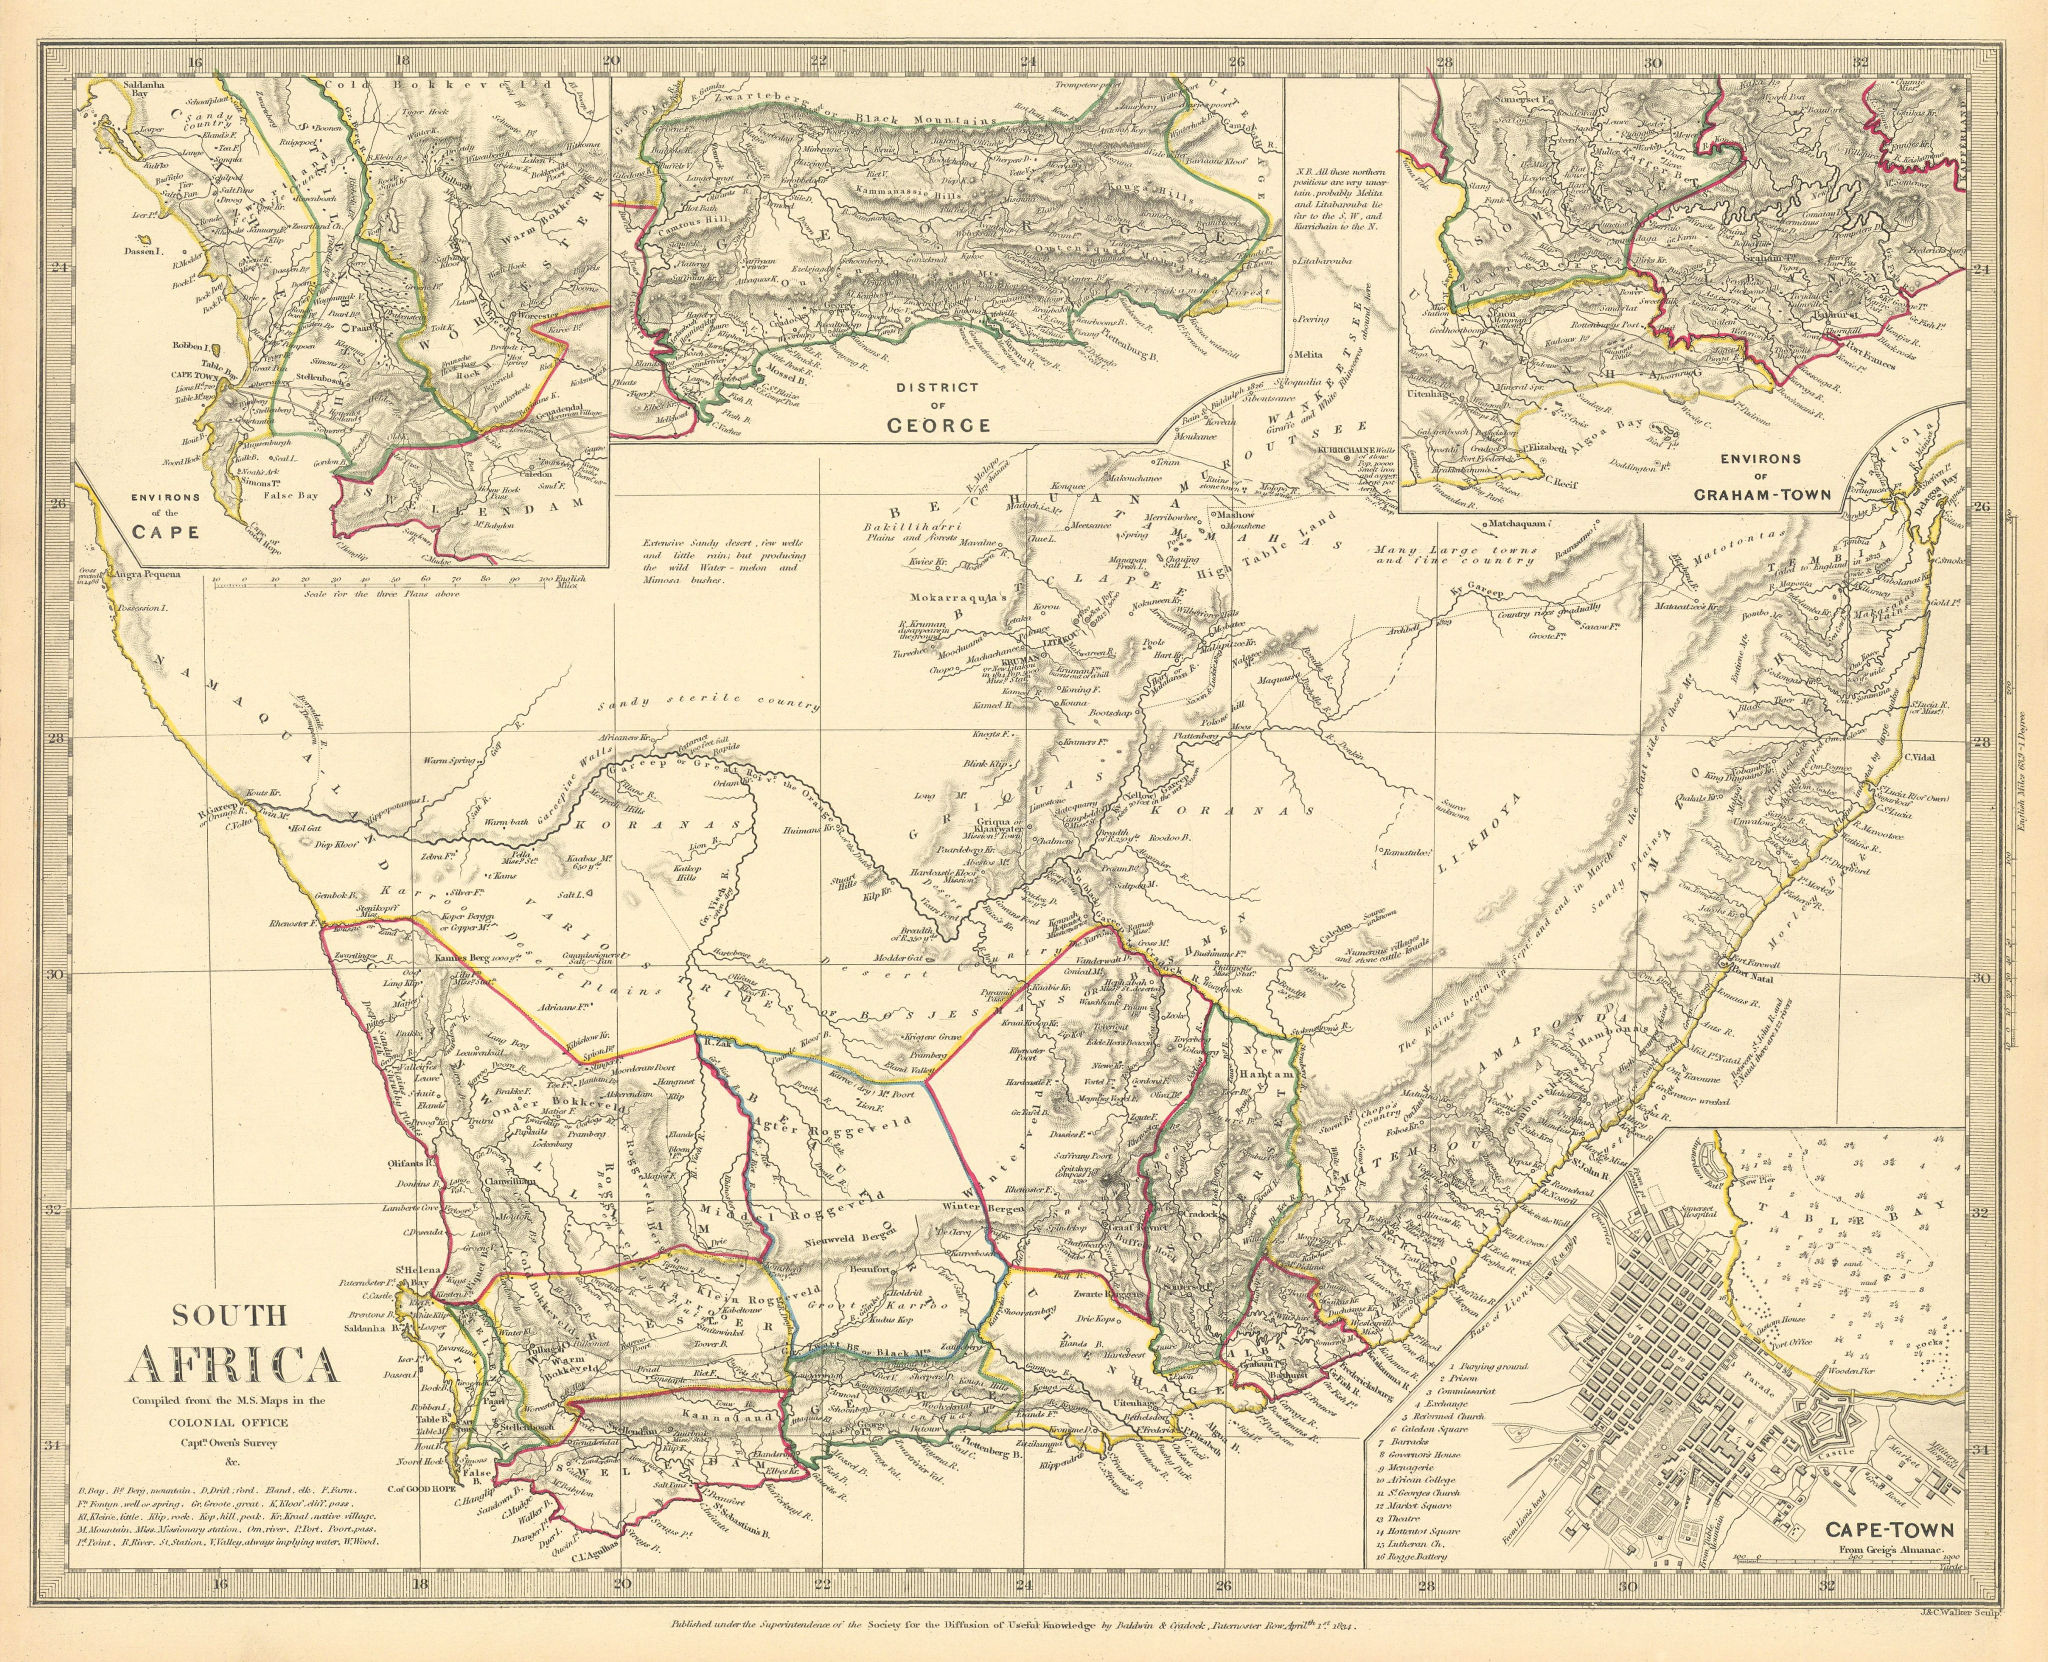 Associate Product SOUTH AFRICA. Cape Town plan. Graham Town. District of George. SDUK 1844 map